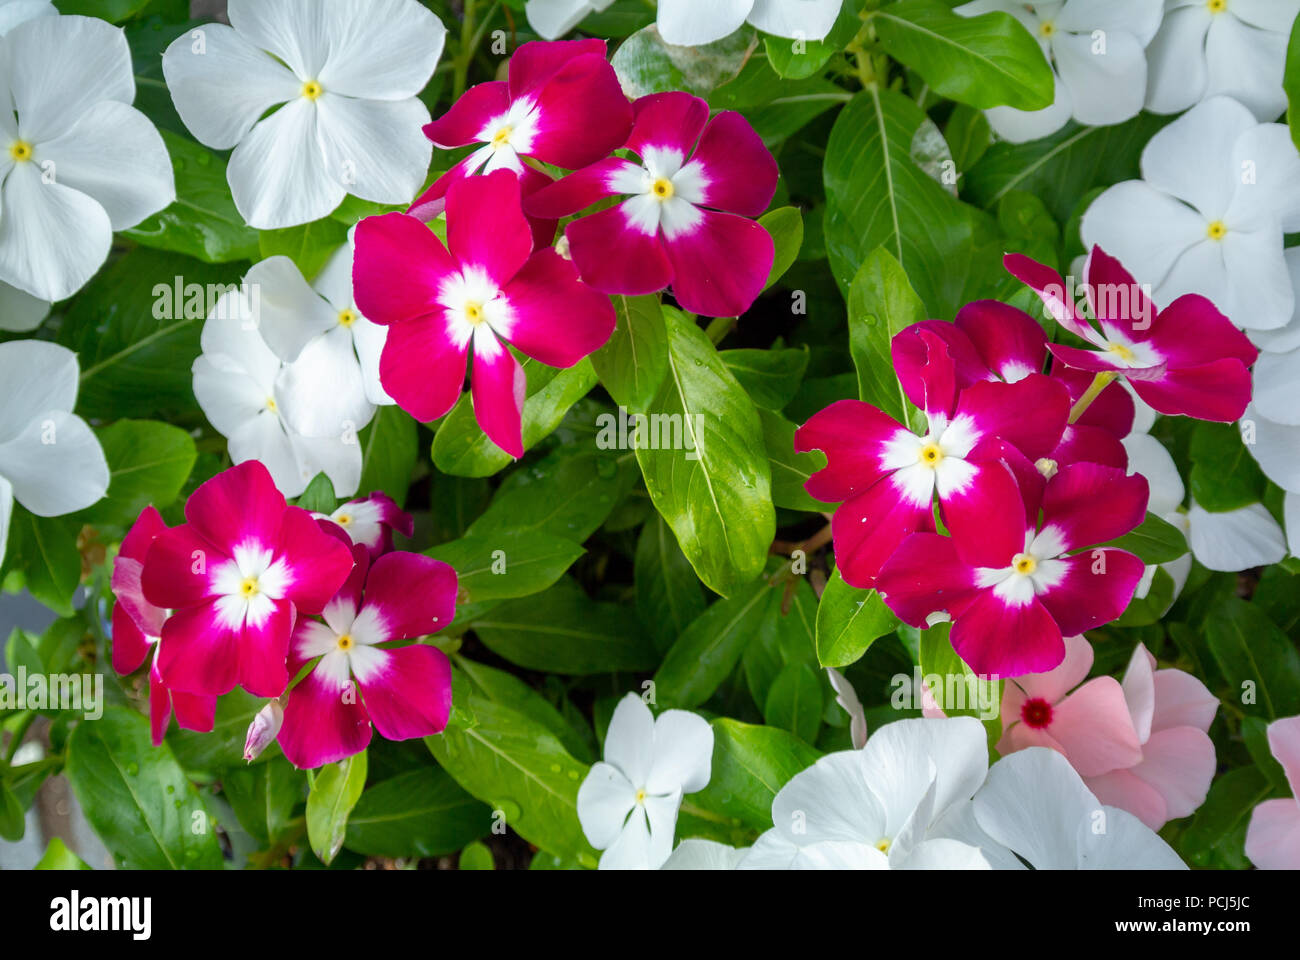 Catharanthus roseus, commonly known as the Madagascar periwinkle, rose periwinkle, or rosy periwinkle, Cape periwinkle and old-maid. Stock Photo